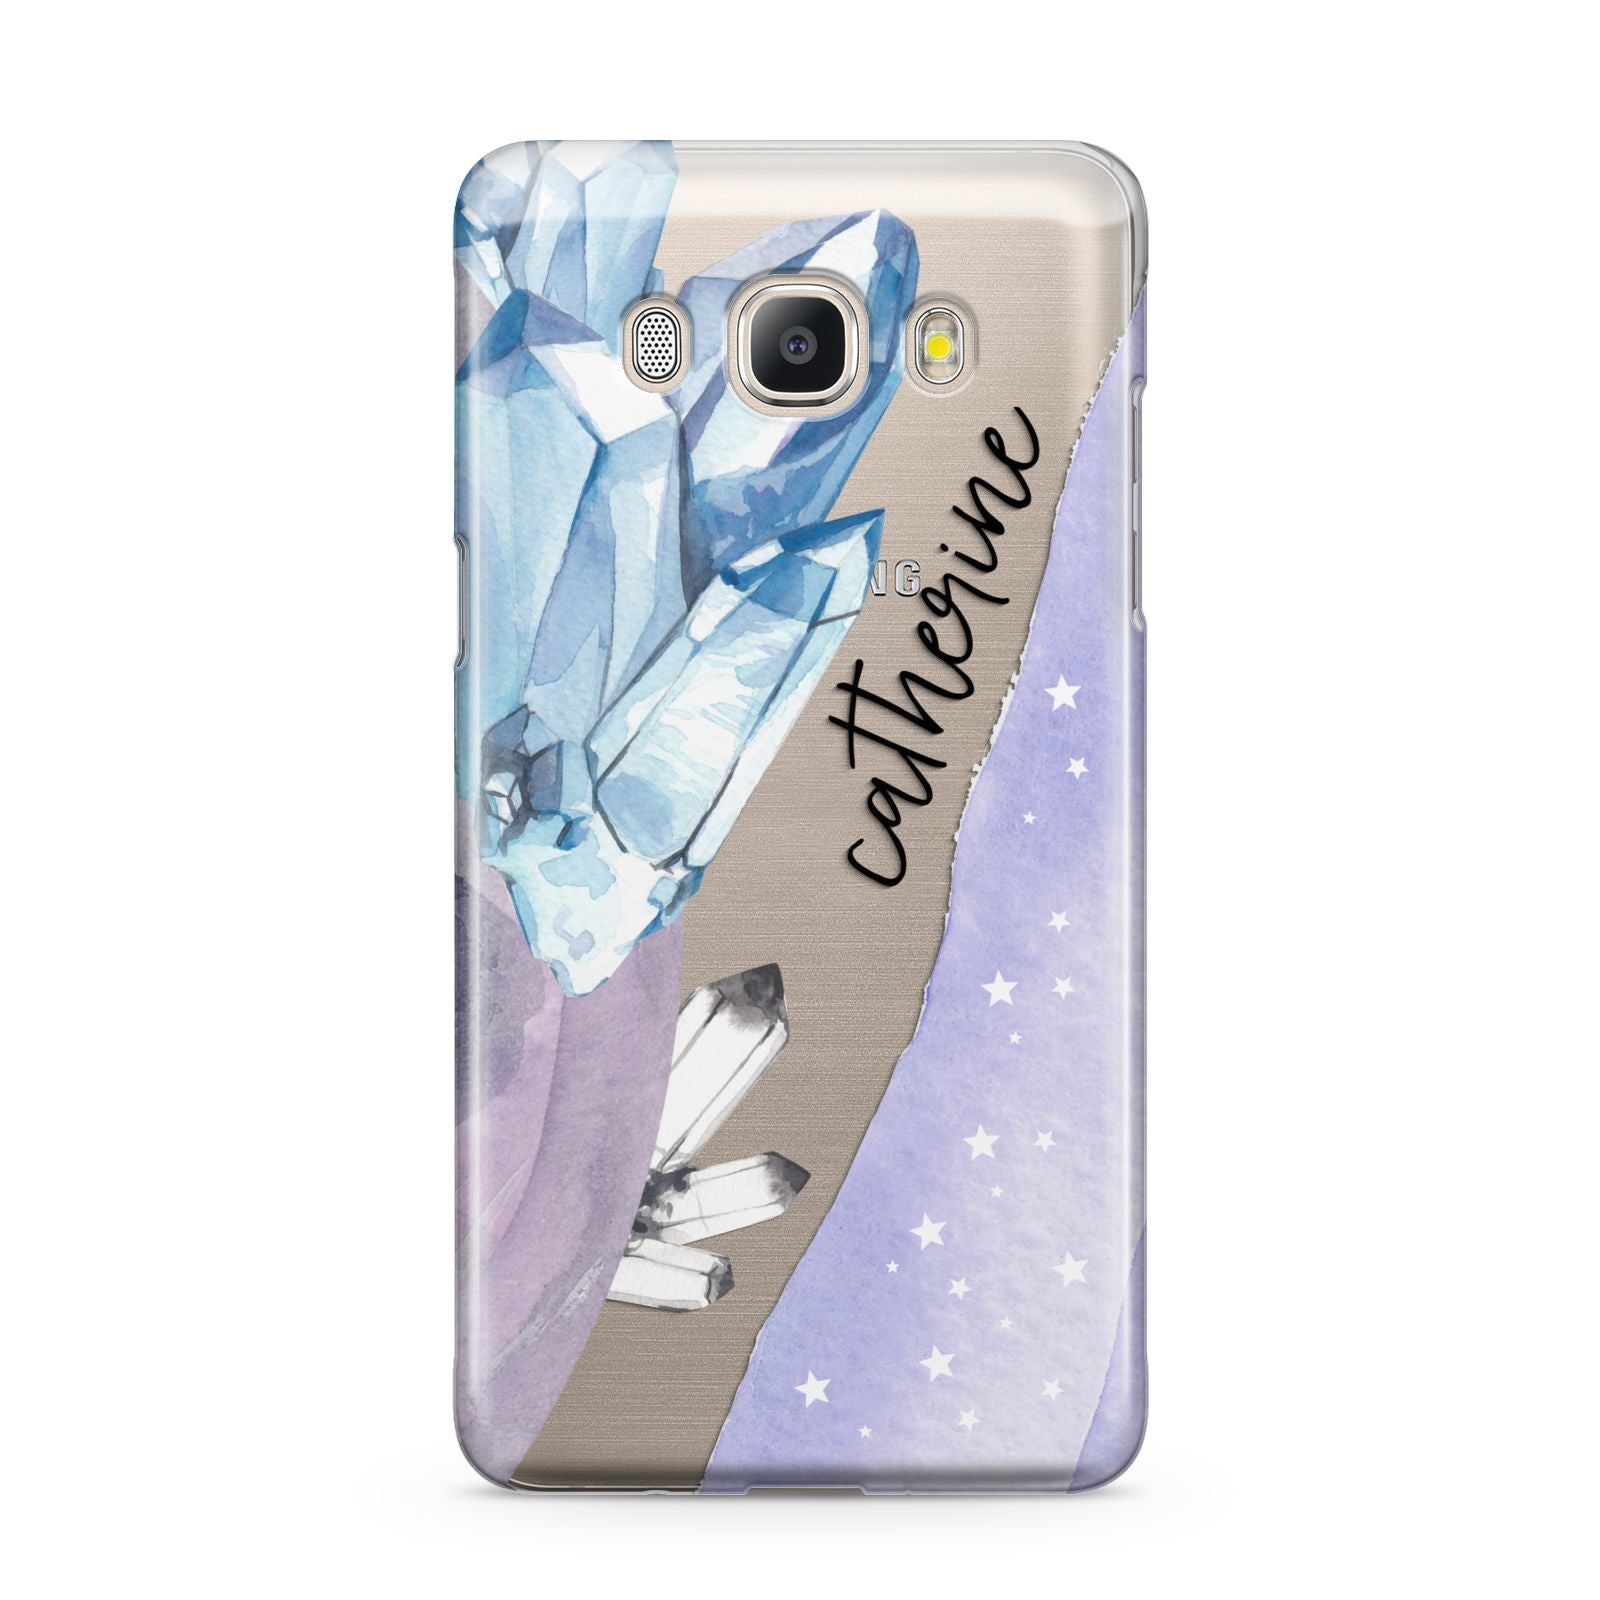 Crystals Personalised Name Samsung Galaxy J5 2016 Case